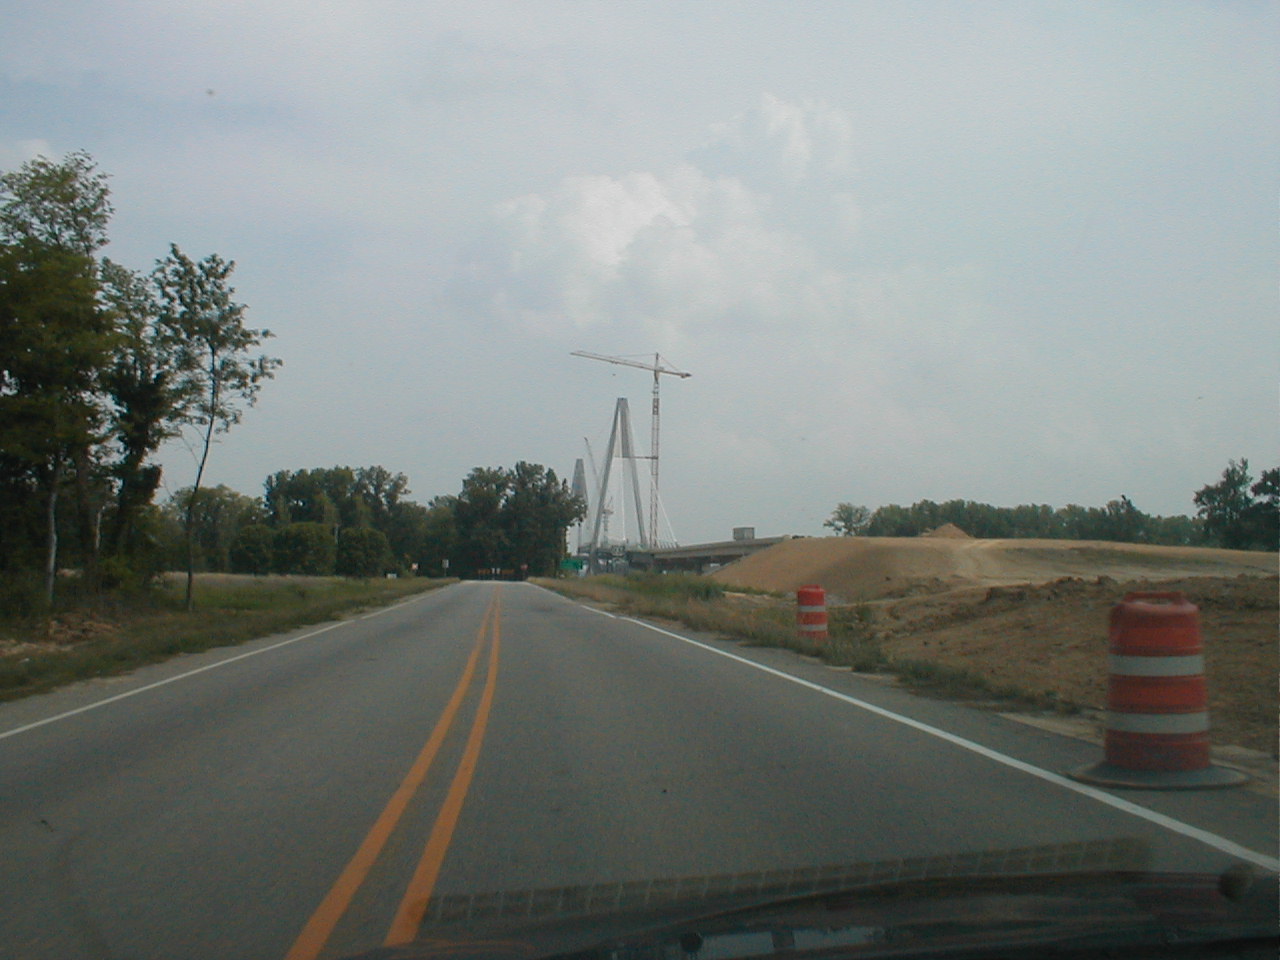 Facing south on US 231 towards the bridge. This is at the IN 66 intersection. Both towers and their cables are visible.